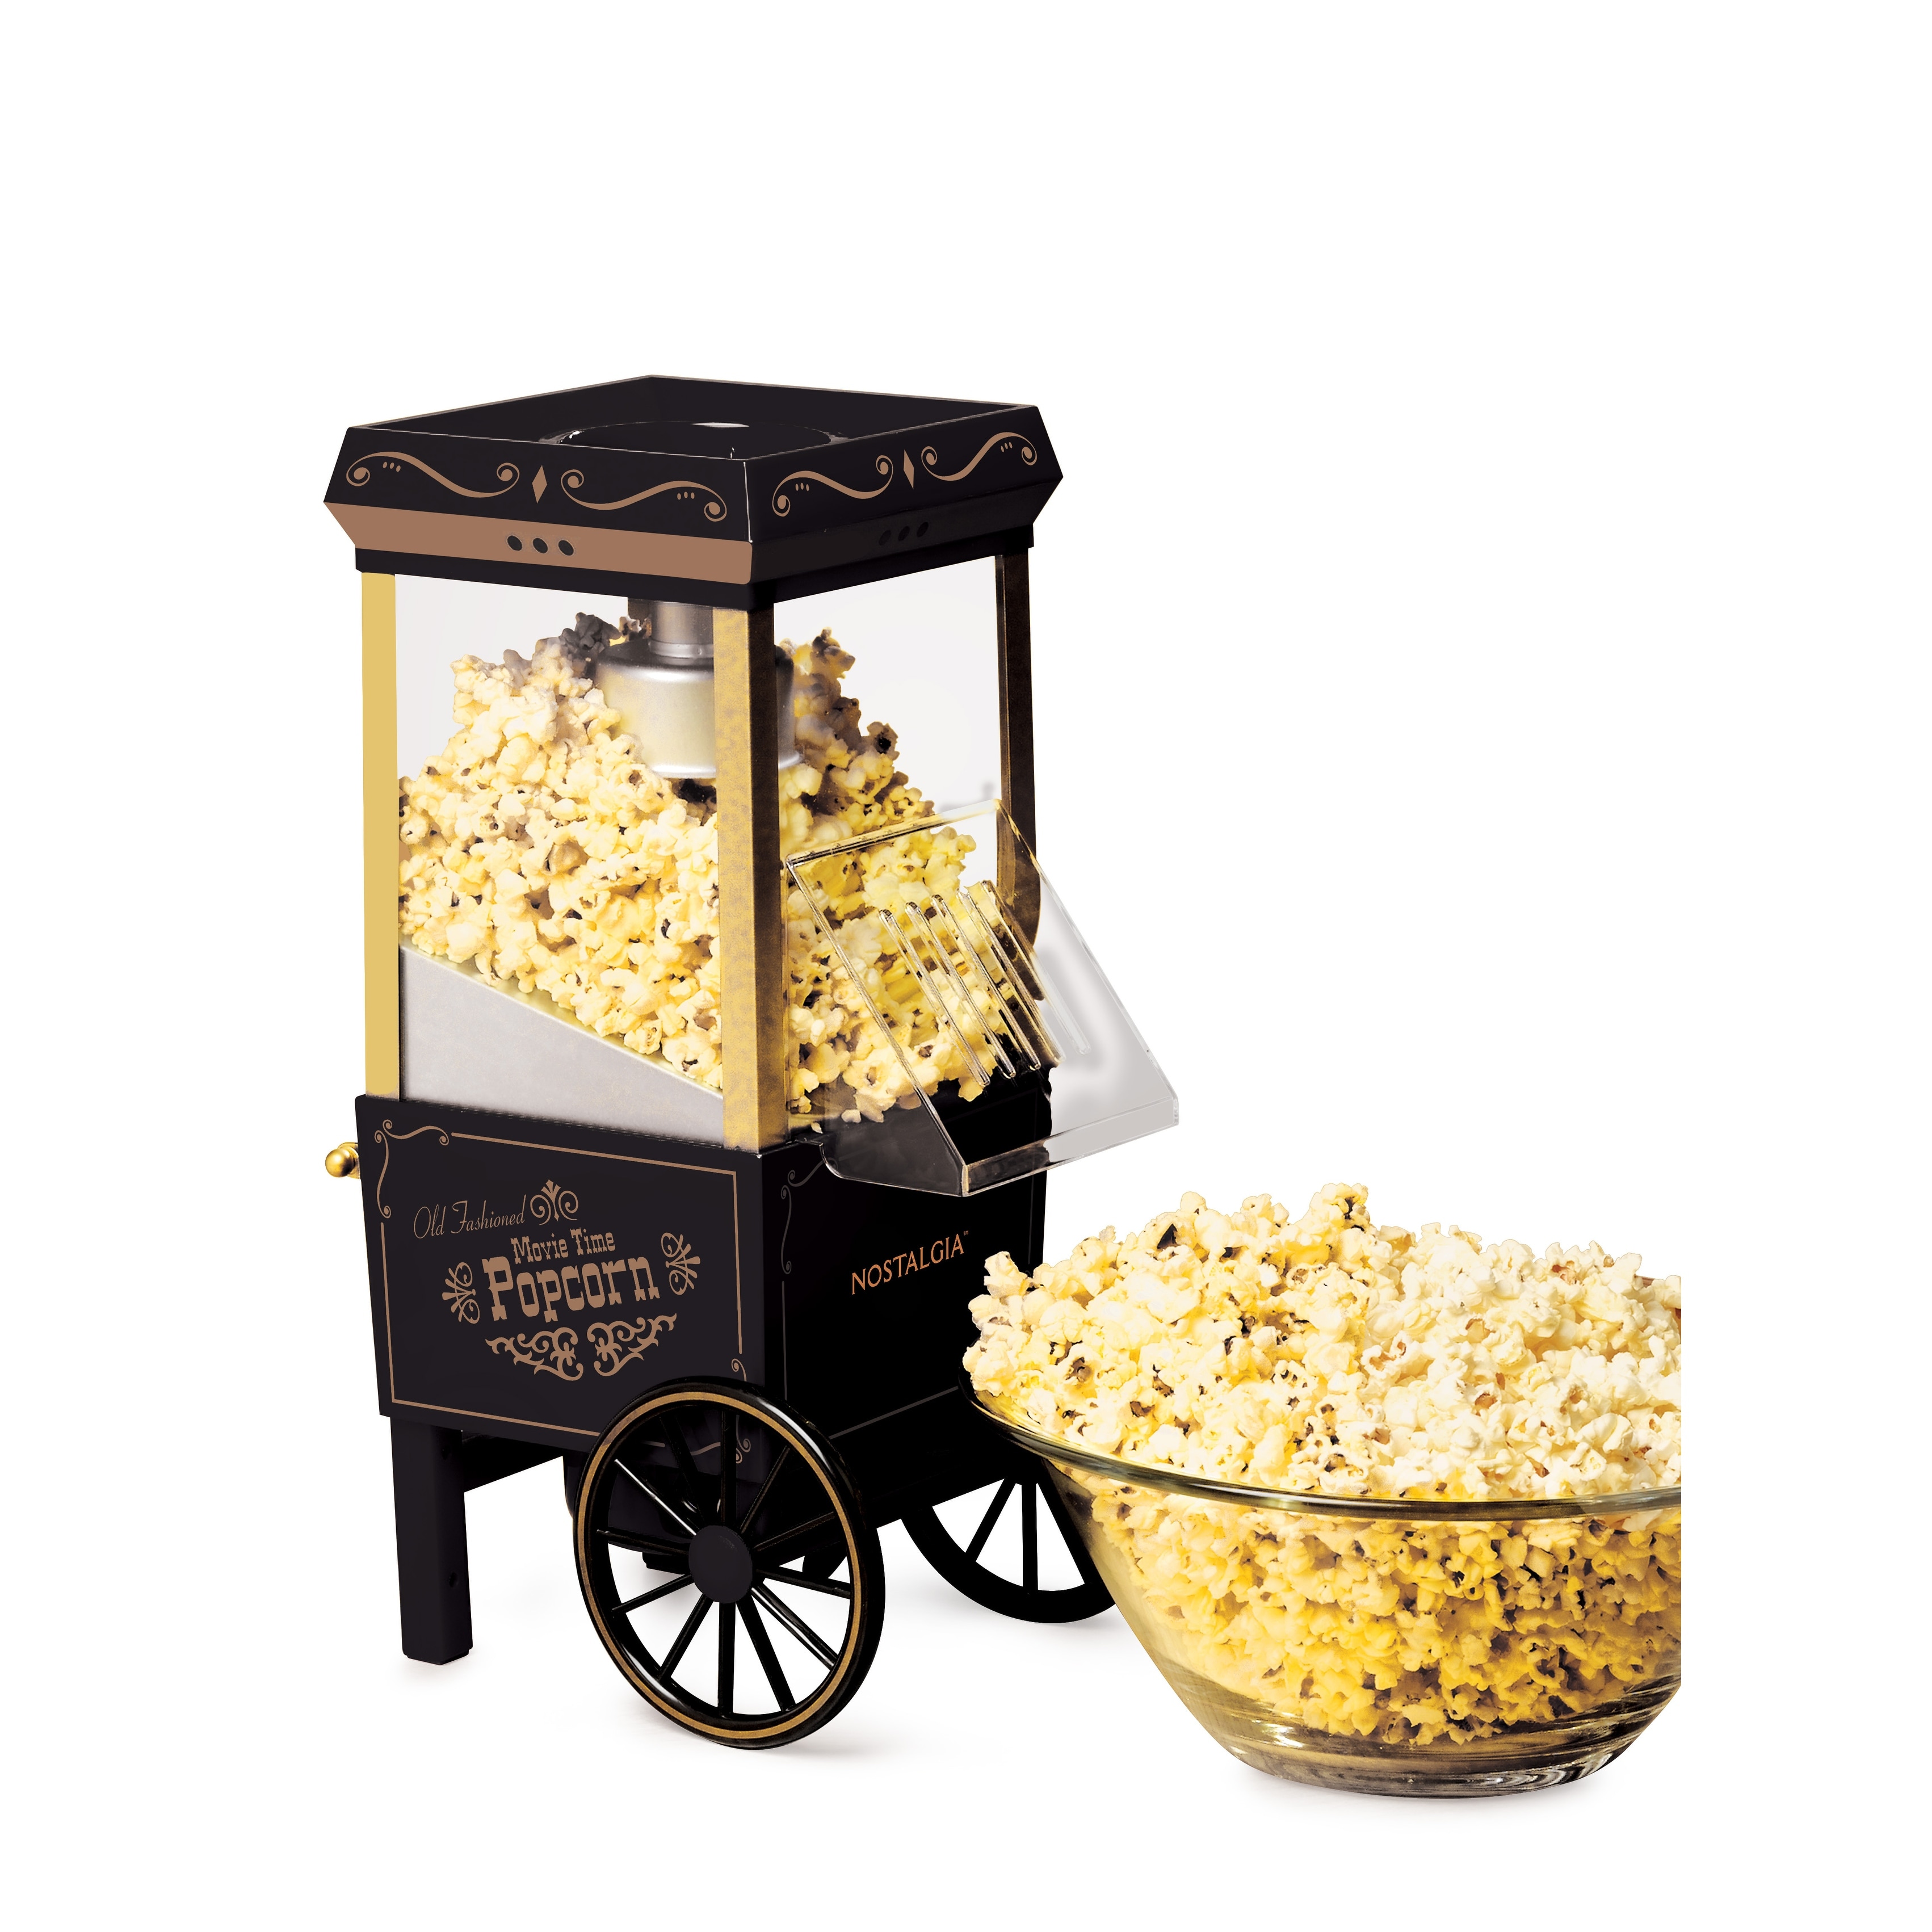 https://ak1.ostkcdn.com/images/products/is/images/direct/16d676dad85362920f4ac951459838071a48f0b5/Nostalgia-12-Cup-Hot-Air-Popcorn-Maker%2C-Black.jpg